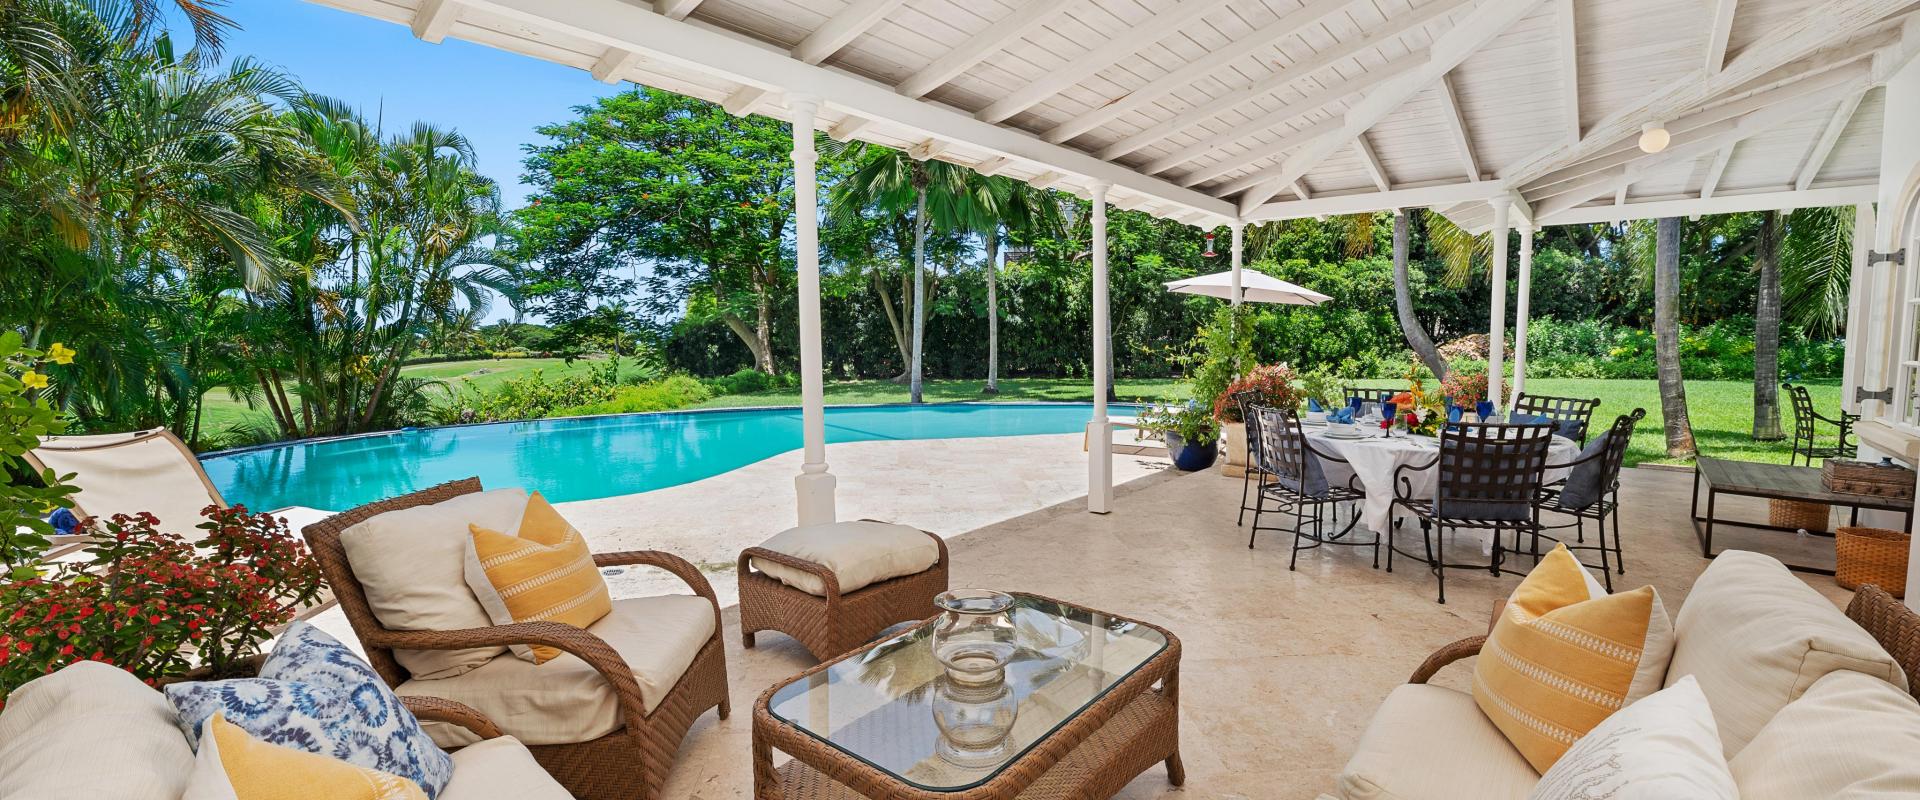 Villa Rosa Holiday Rental Villa In Royal Westmoreland Barbados Covered Patio with Seating and Dining Overlooking The Pool and Golf Course